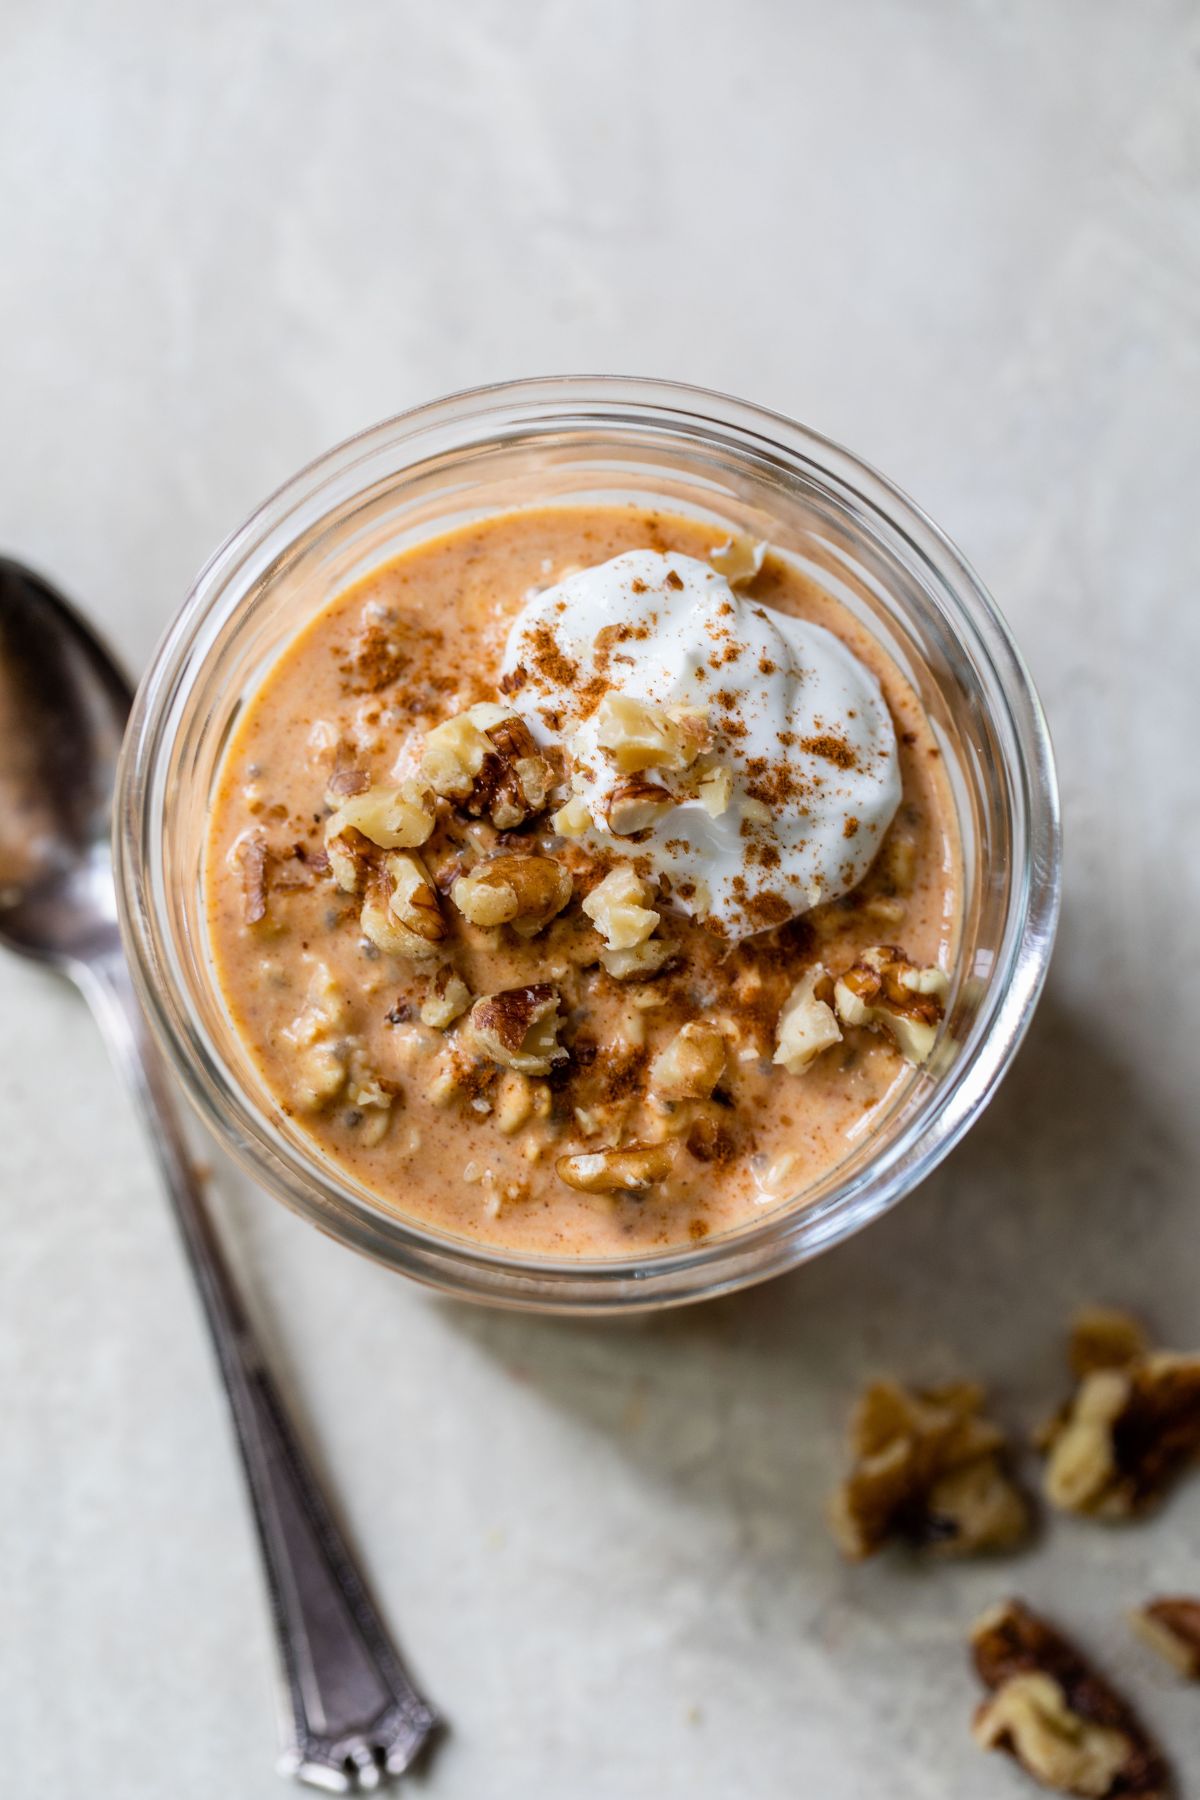 Top view of a jar filled with pumpkin oatmeal and topped with yogurt and walnuts.